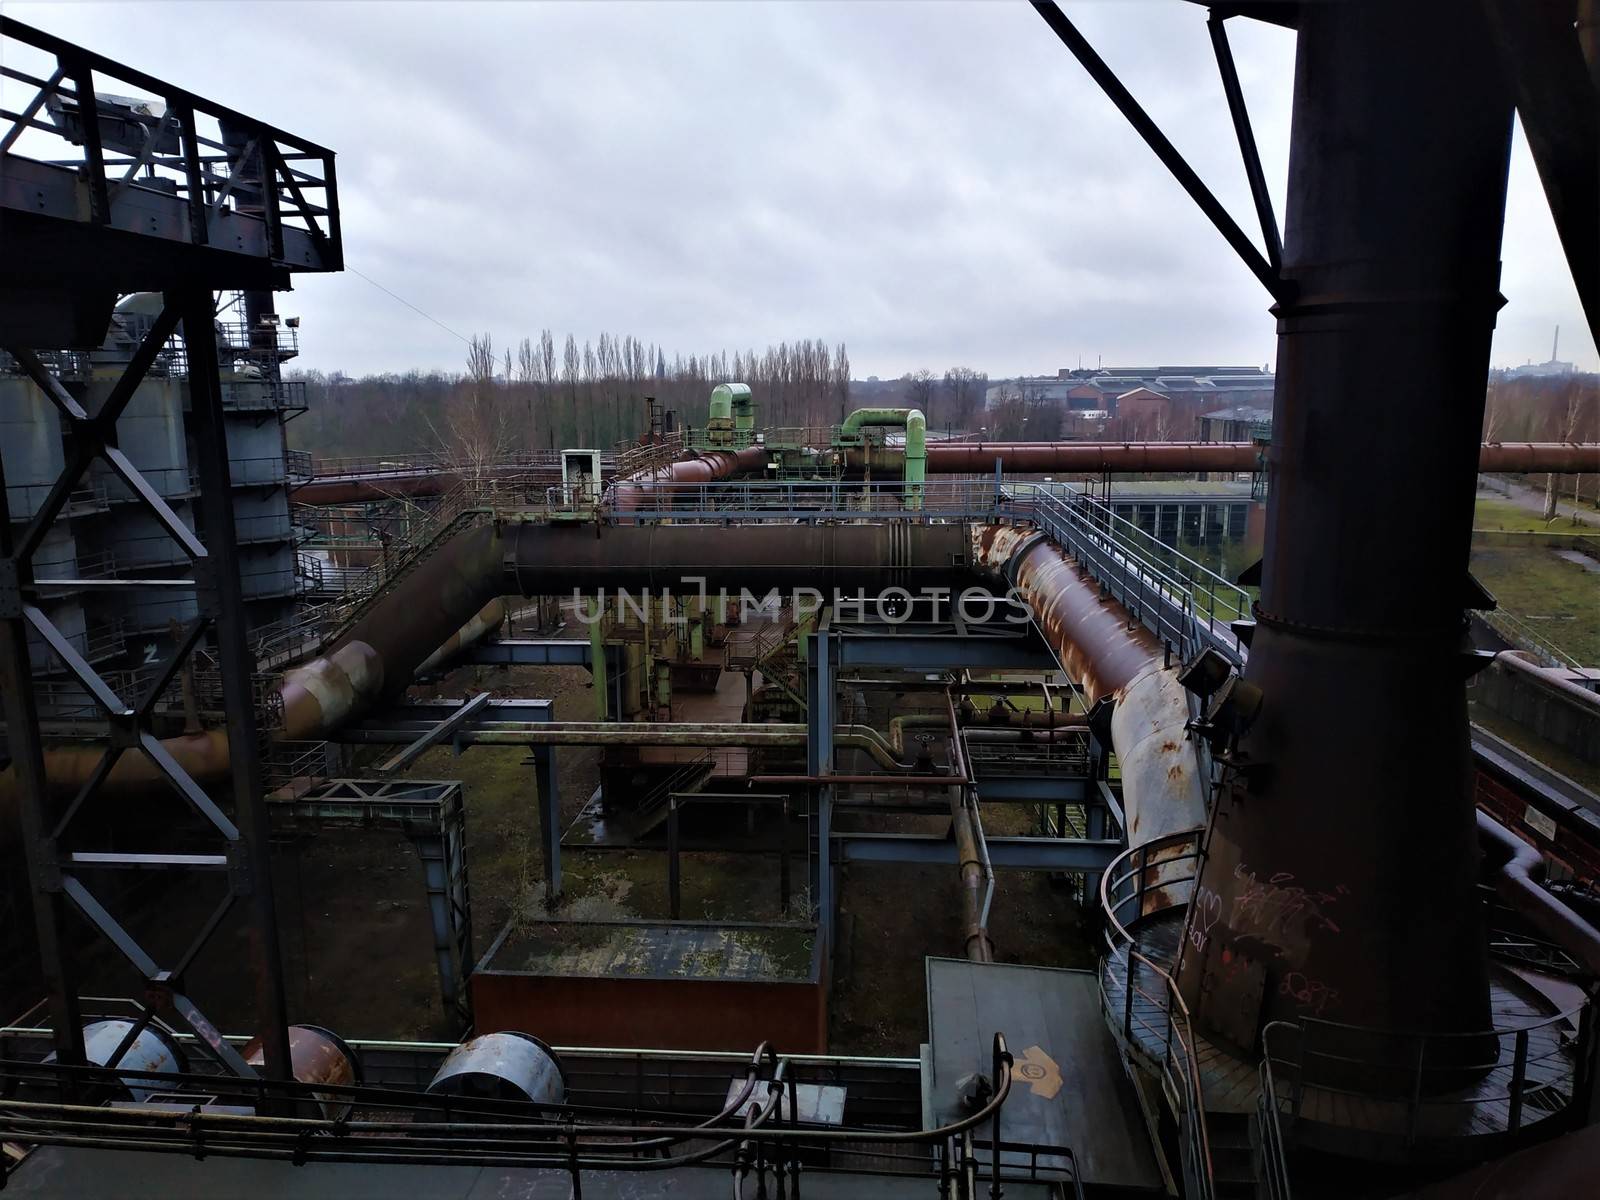 View on rusty tubes and pipes of old industrial plant in Duisburg, Germany